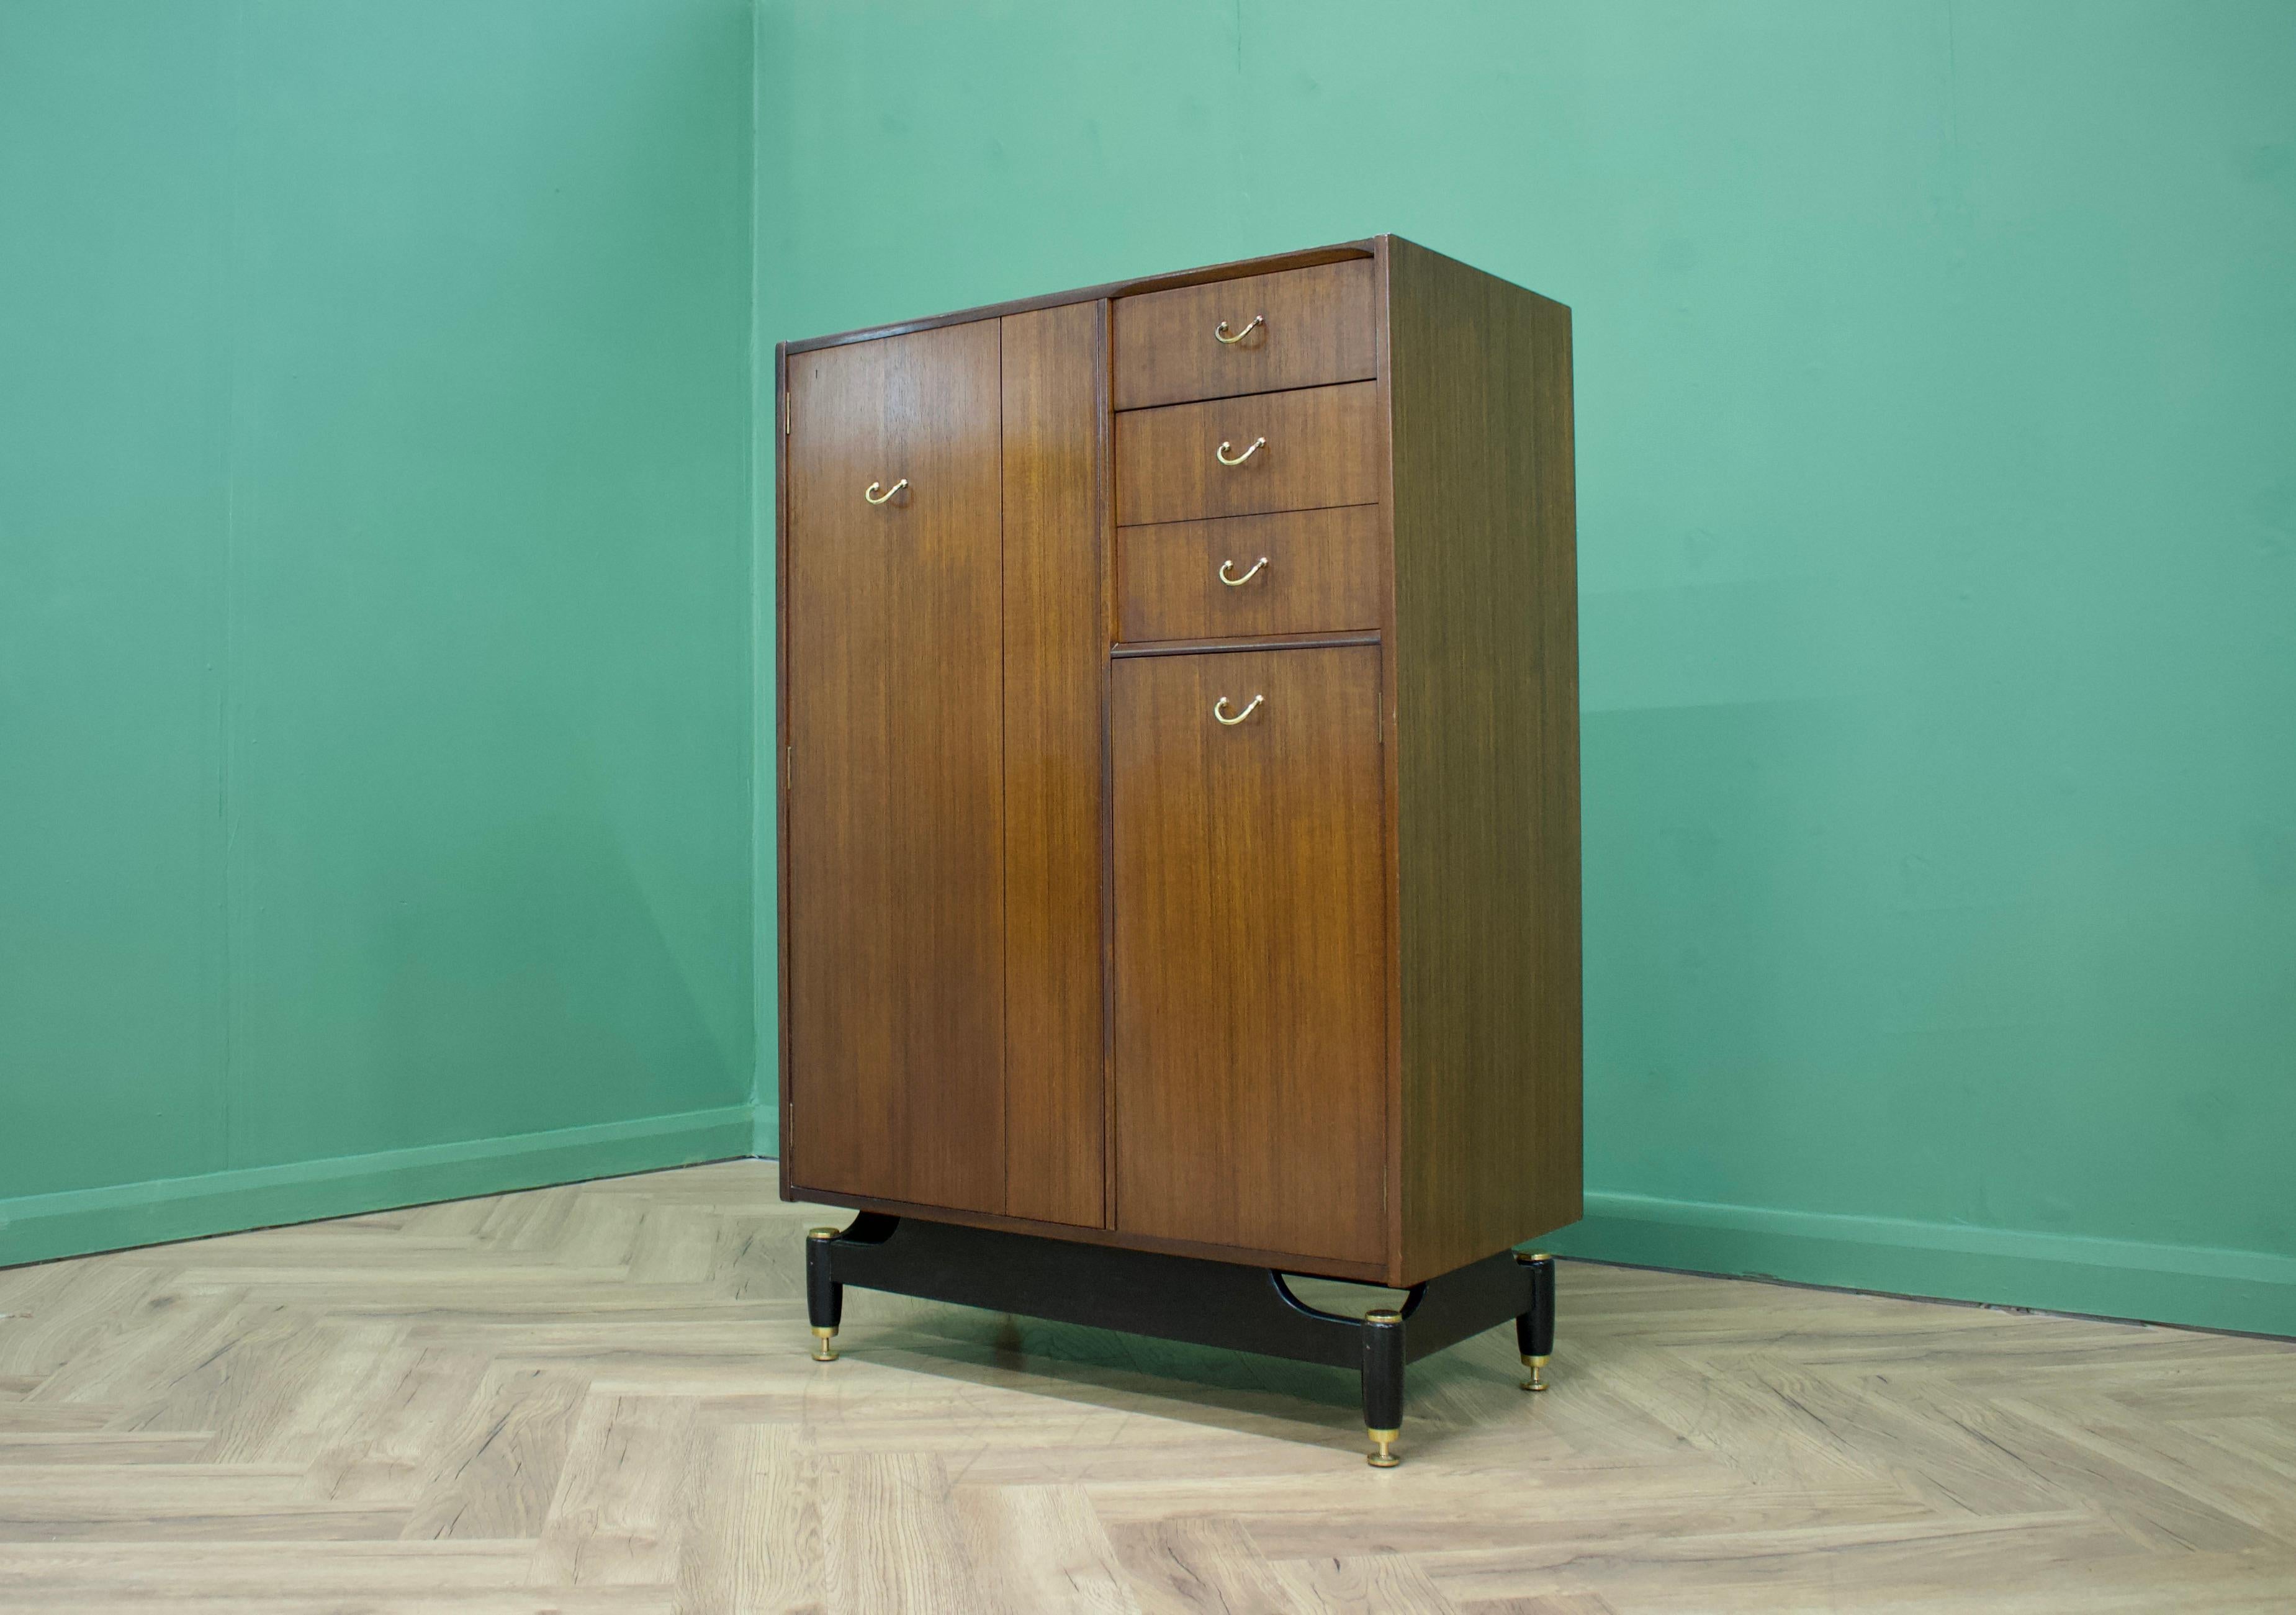 Mid century modern compact wardrobe (Compactum).
Manufactured by G-Plan in the UK. 
Features a pull-out hanging rail inside the left cupboard, 1 shelf in the bottom right cupboard and 3 drawers.
 